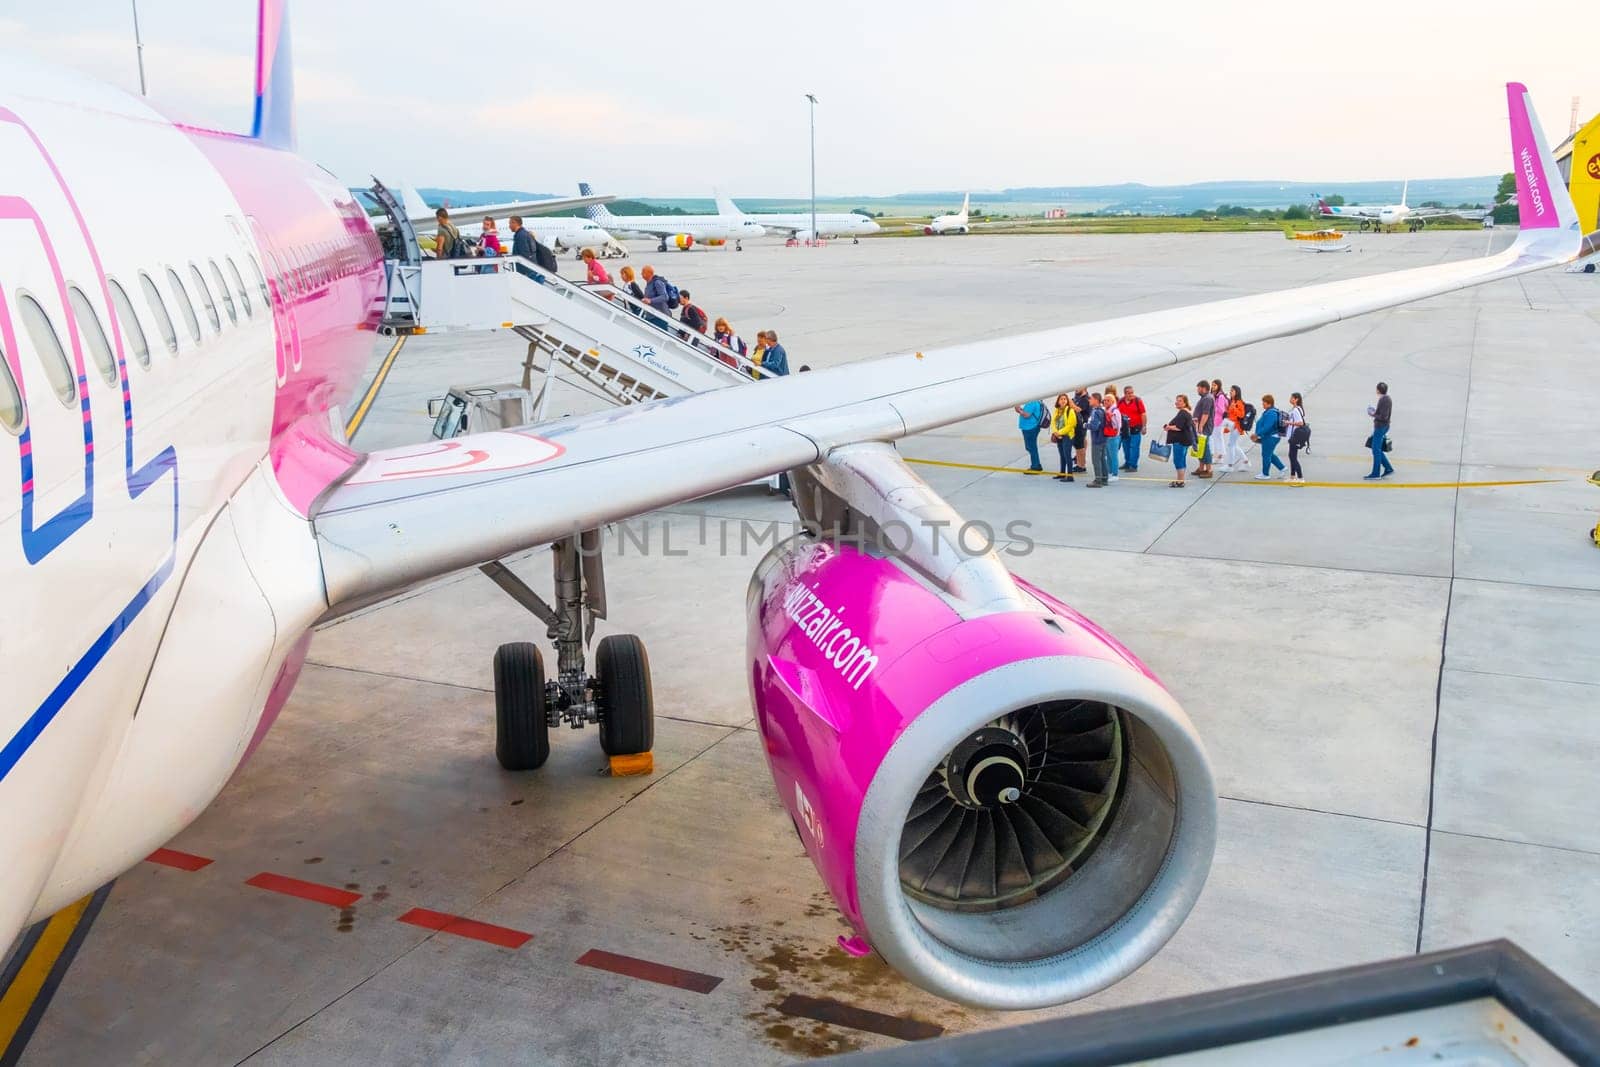 Wizzair airplane turbine and people boarding the plane by vladimka